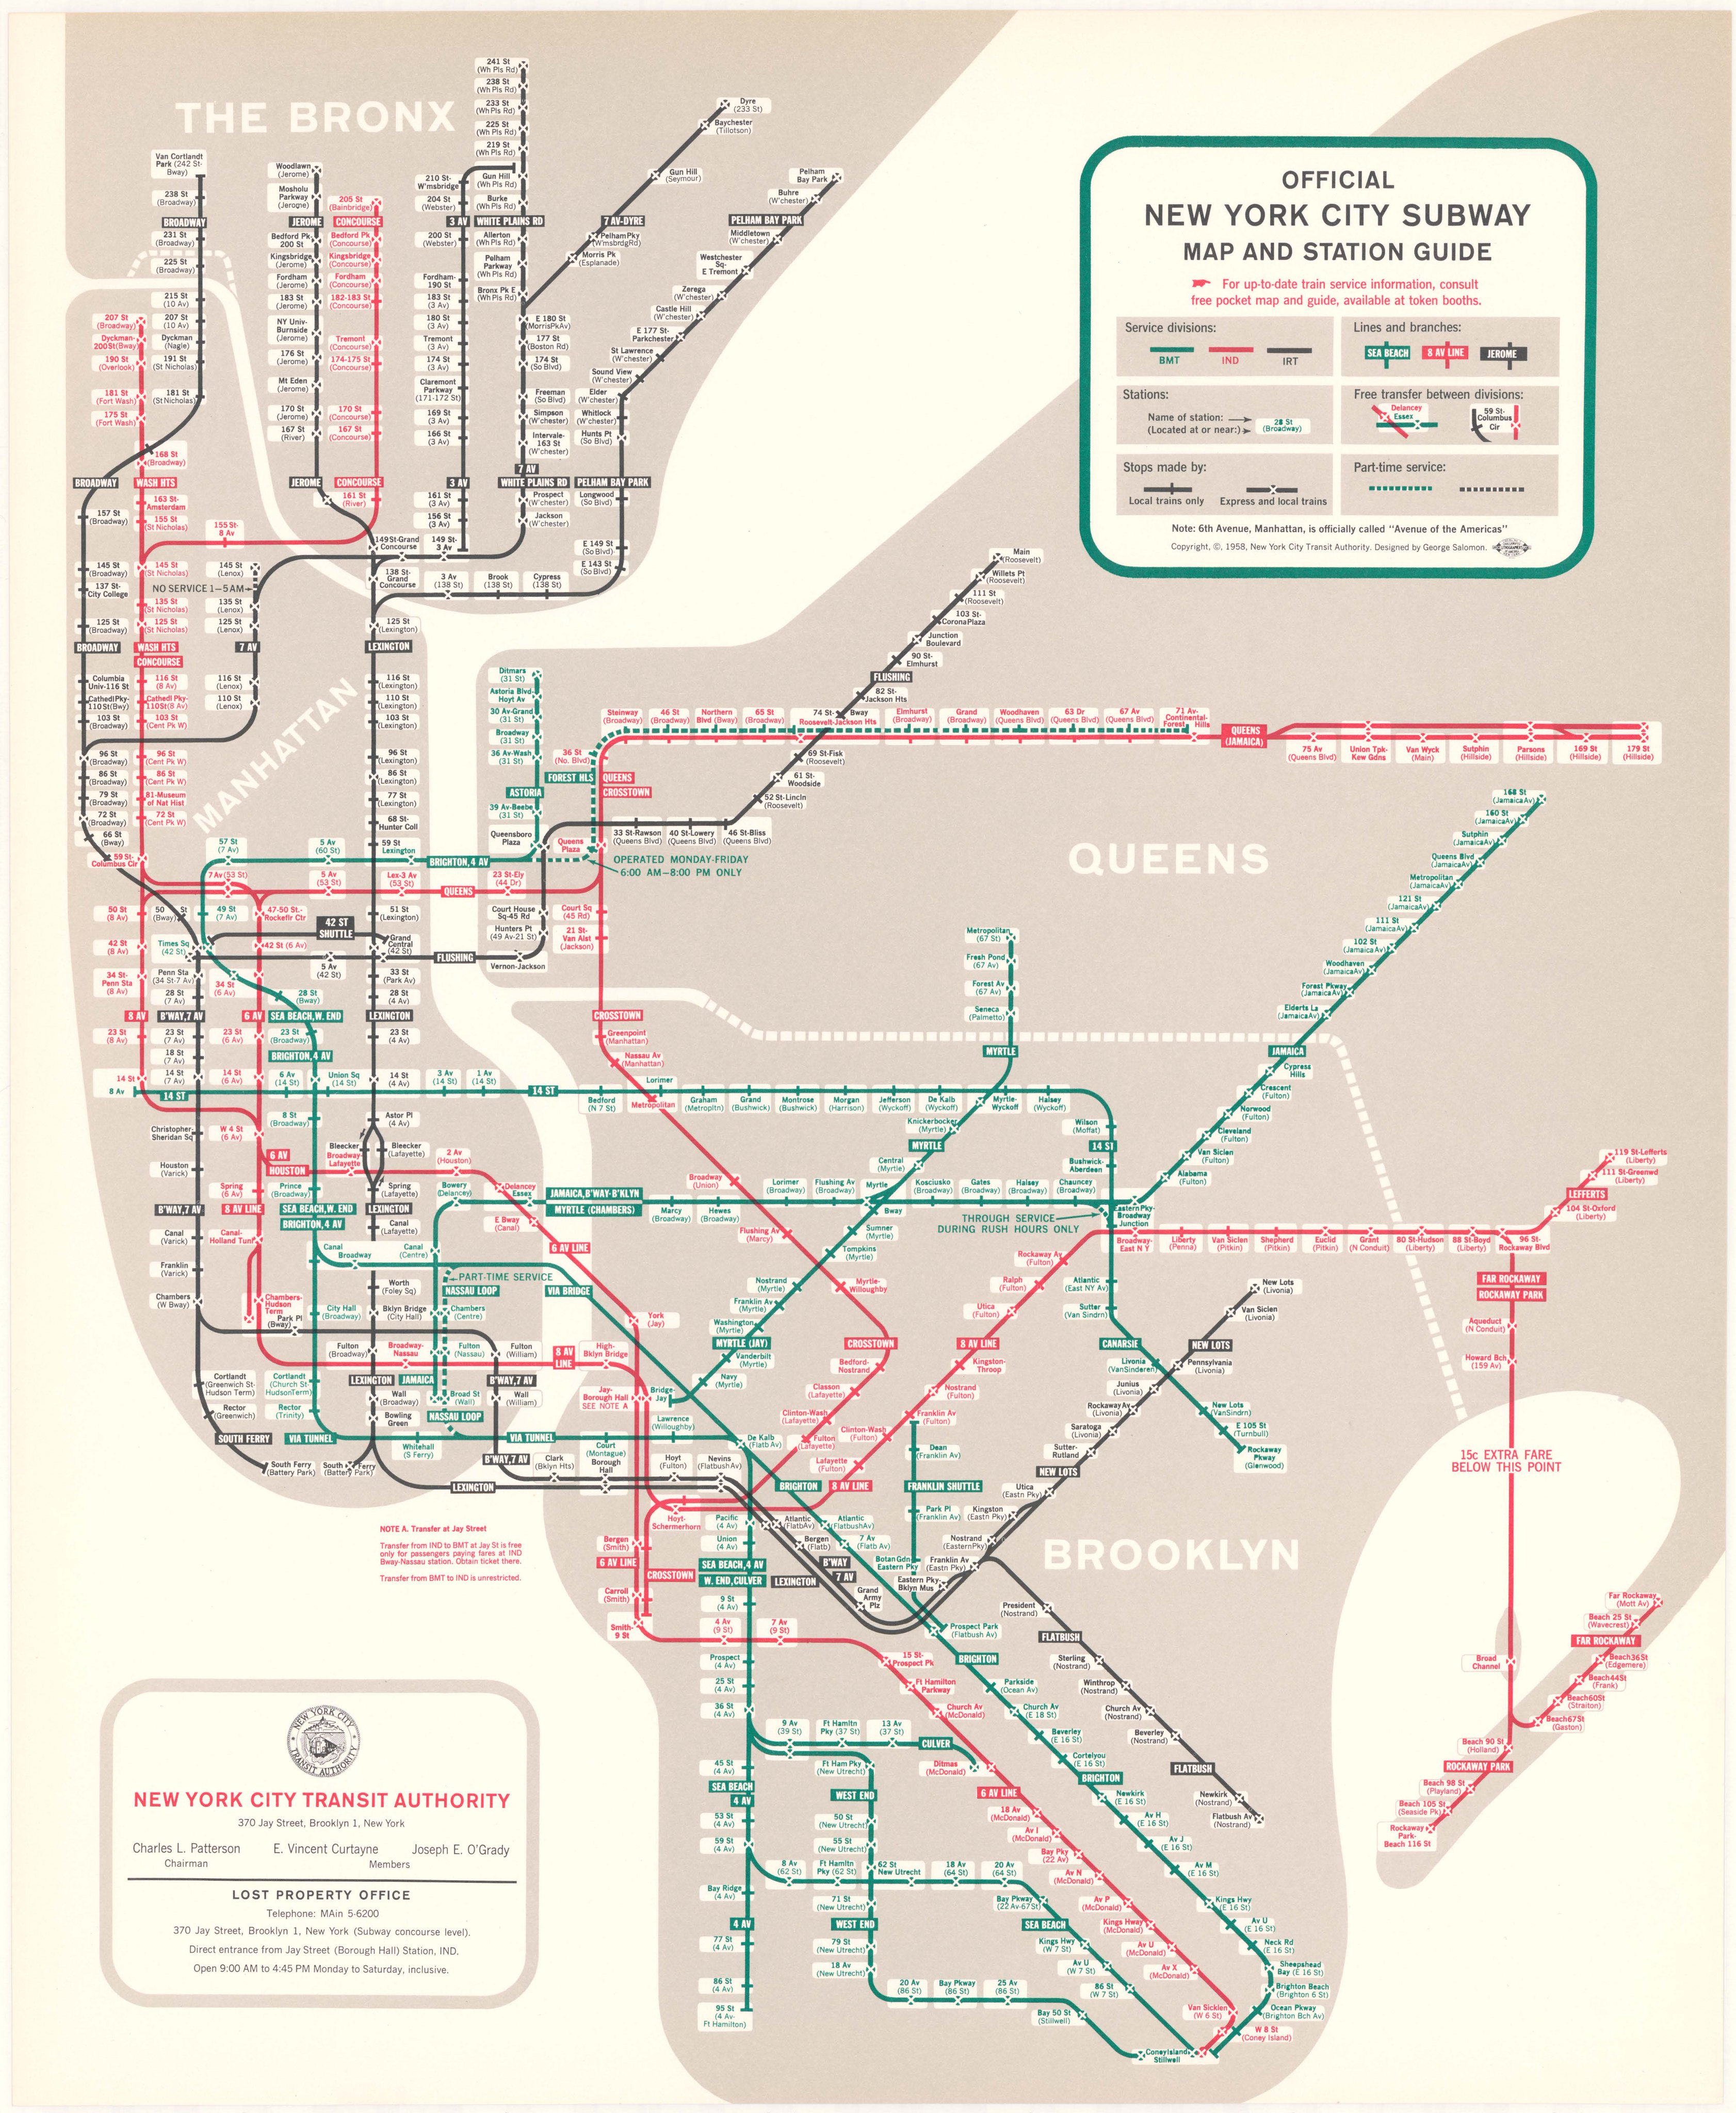 frugter mode Leonardoda NY Transit Museum on Twitter: "Diagrammatic maps date back to 1931 with  Harry Beck's London Tube map, but it wasn't until 1958 that this type of  map was adopted in #NYC with